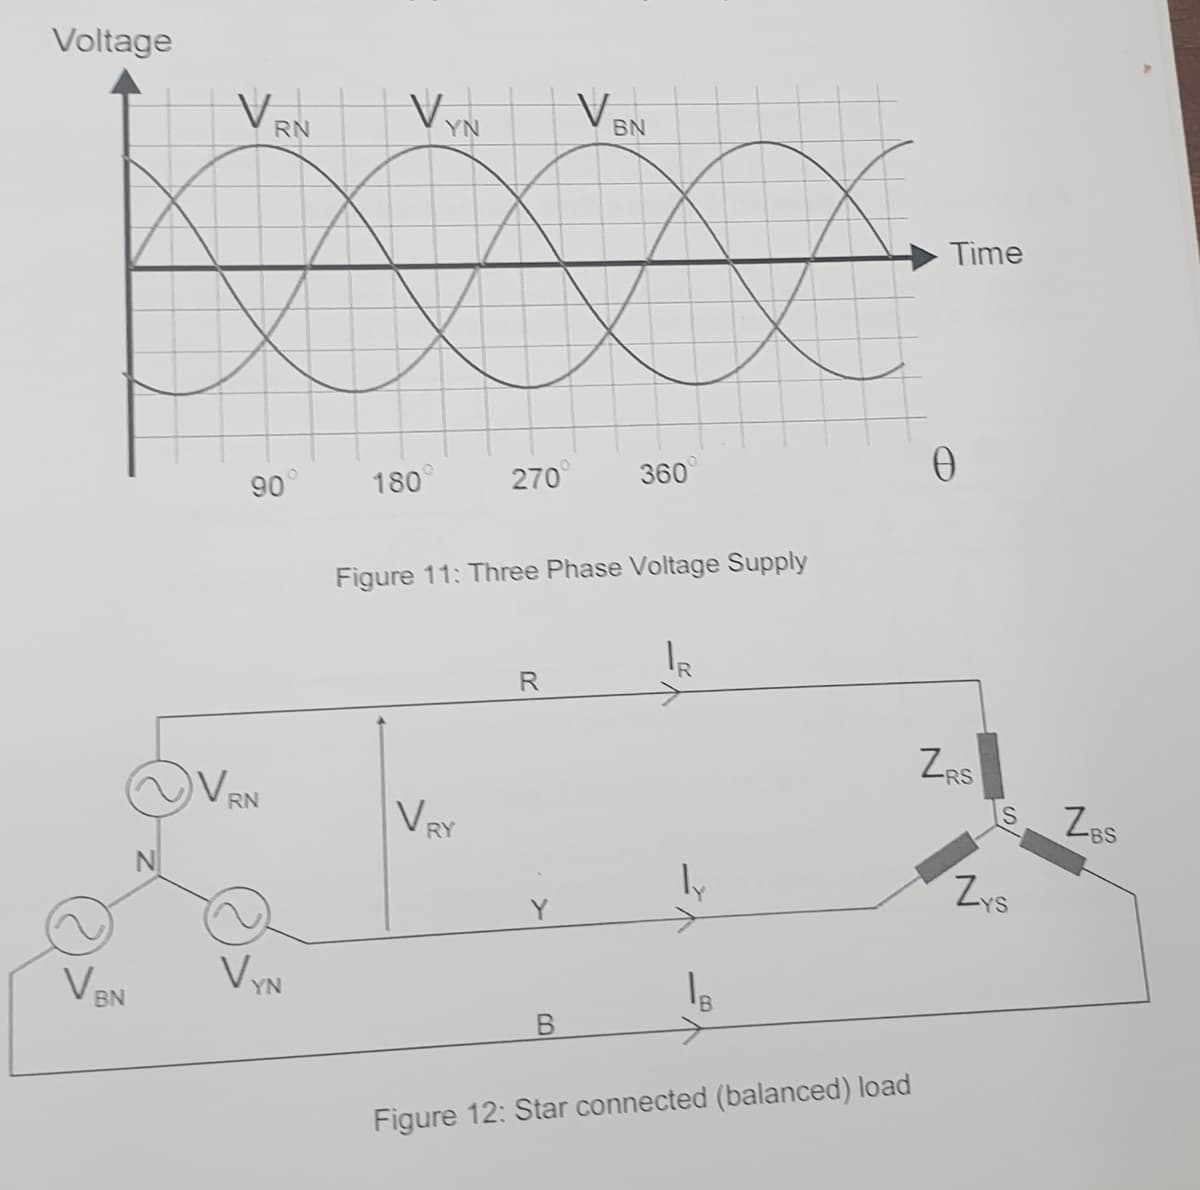 Voltage
V,
V,
V,
RN
YN
BN
Time
270
360
90°
180
Figure 11: Three Phase Voltage Supply
IR
R
ZAS
VRN
VRY
ZBs
ly
VEN
VIN
Figure 12: Star connected (balanced) load
の/
B.
